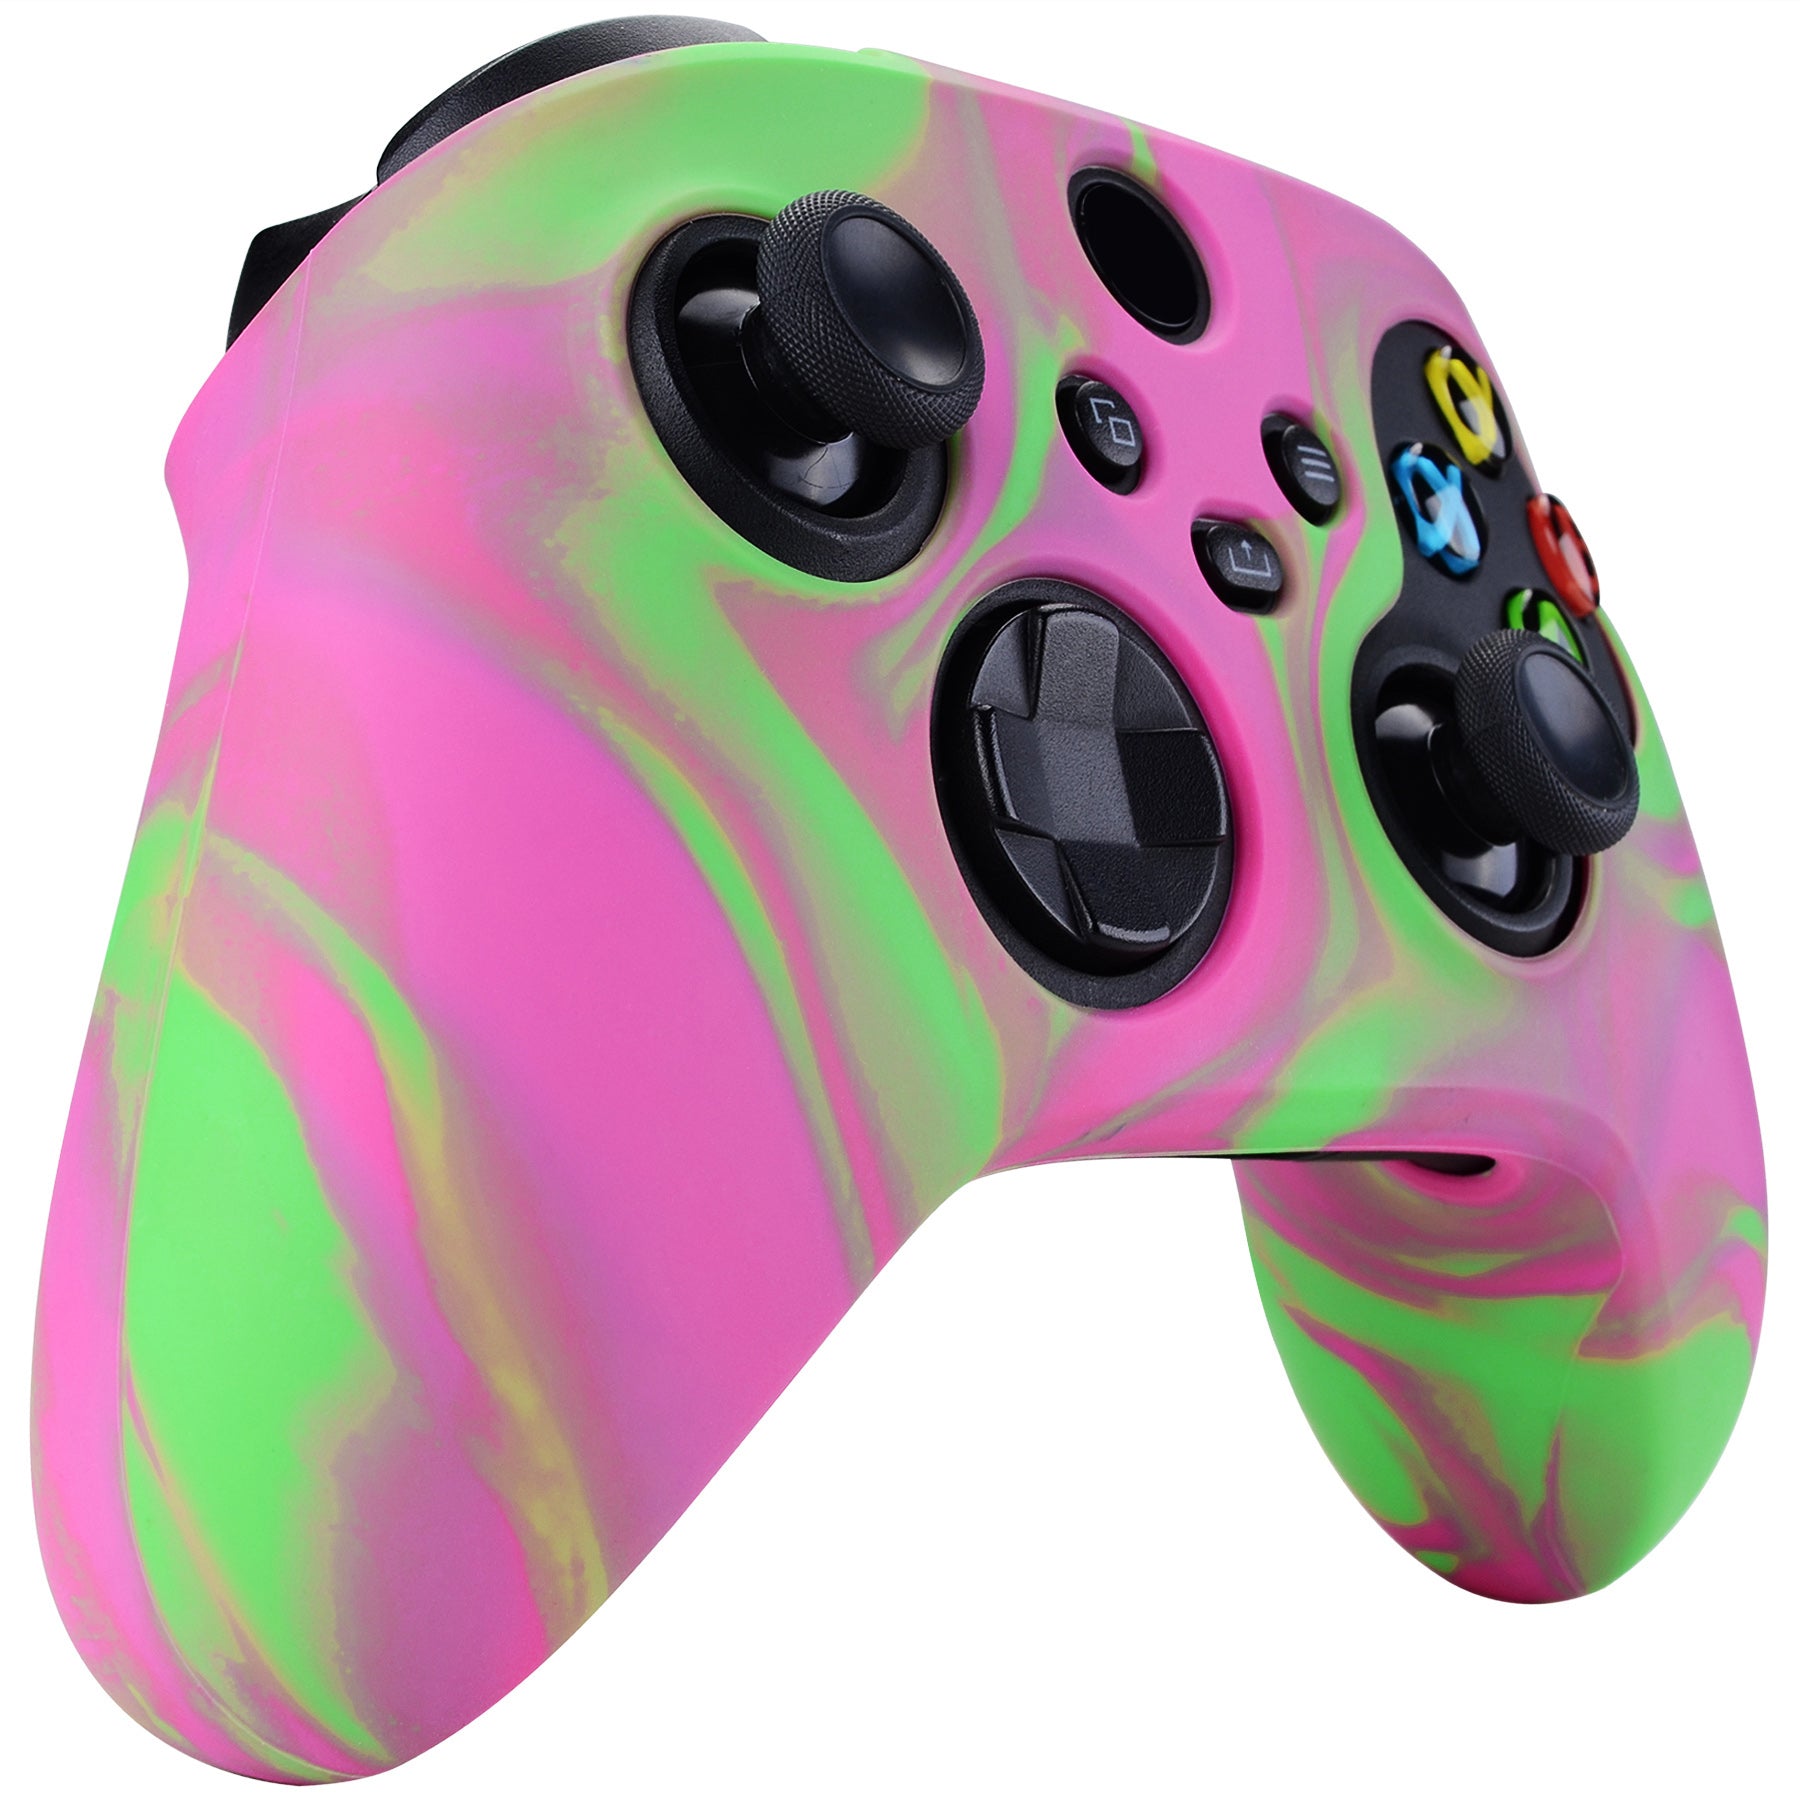 Xbox 360 Wireless Controller Pink